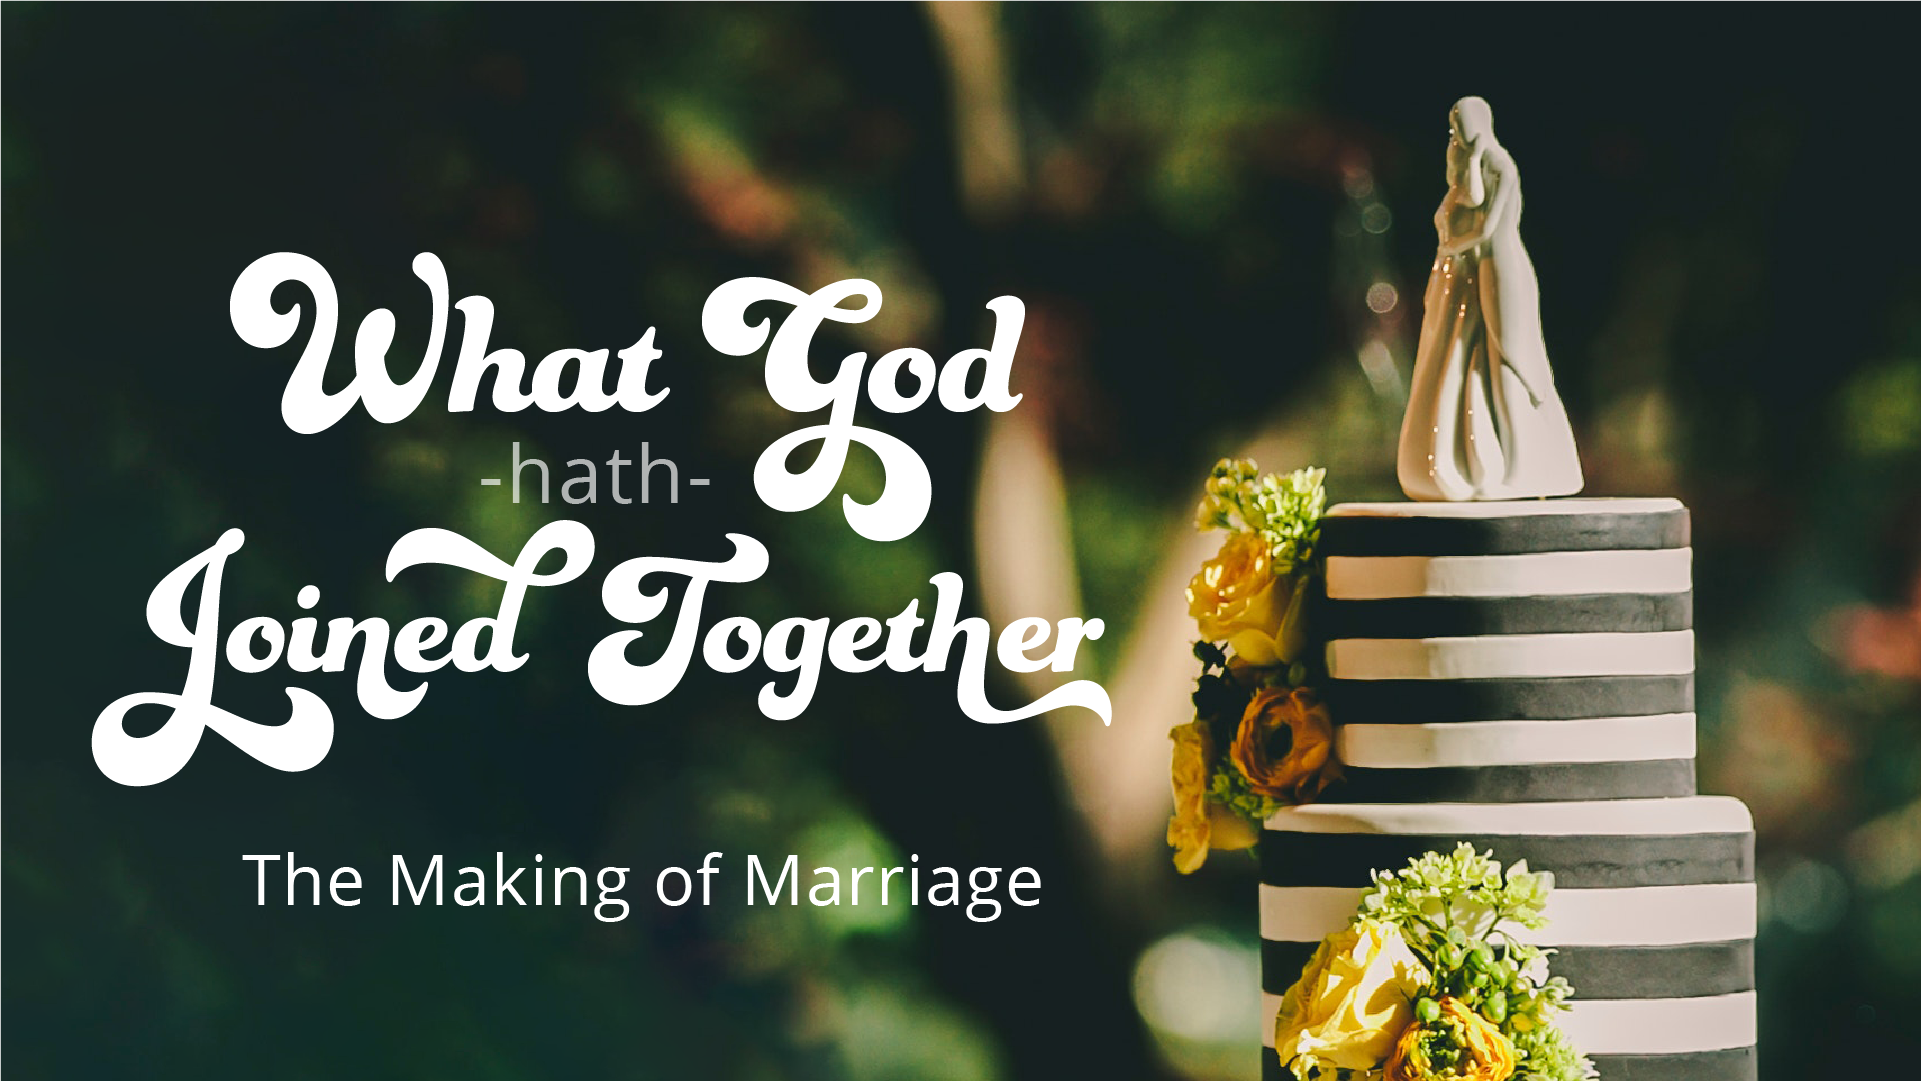 Introduction to 'What God Has Joined Together'